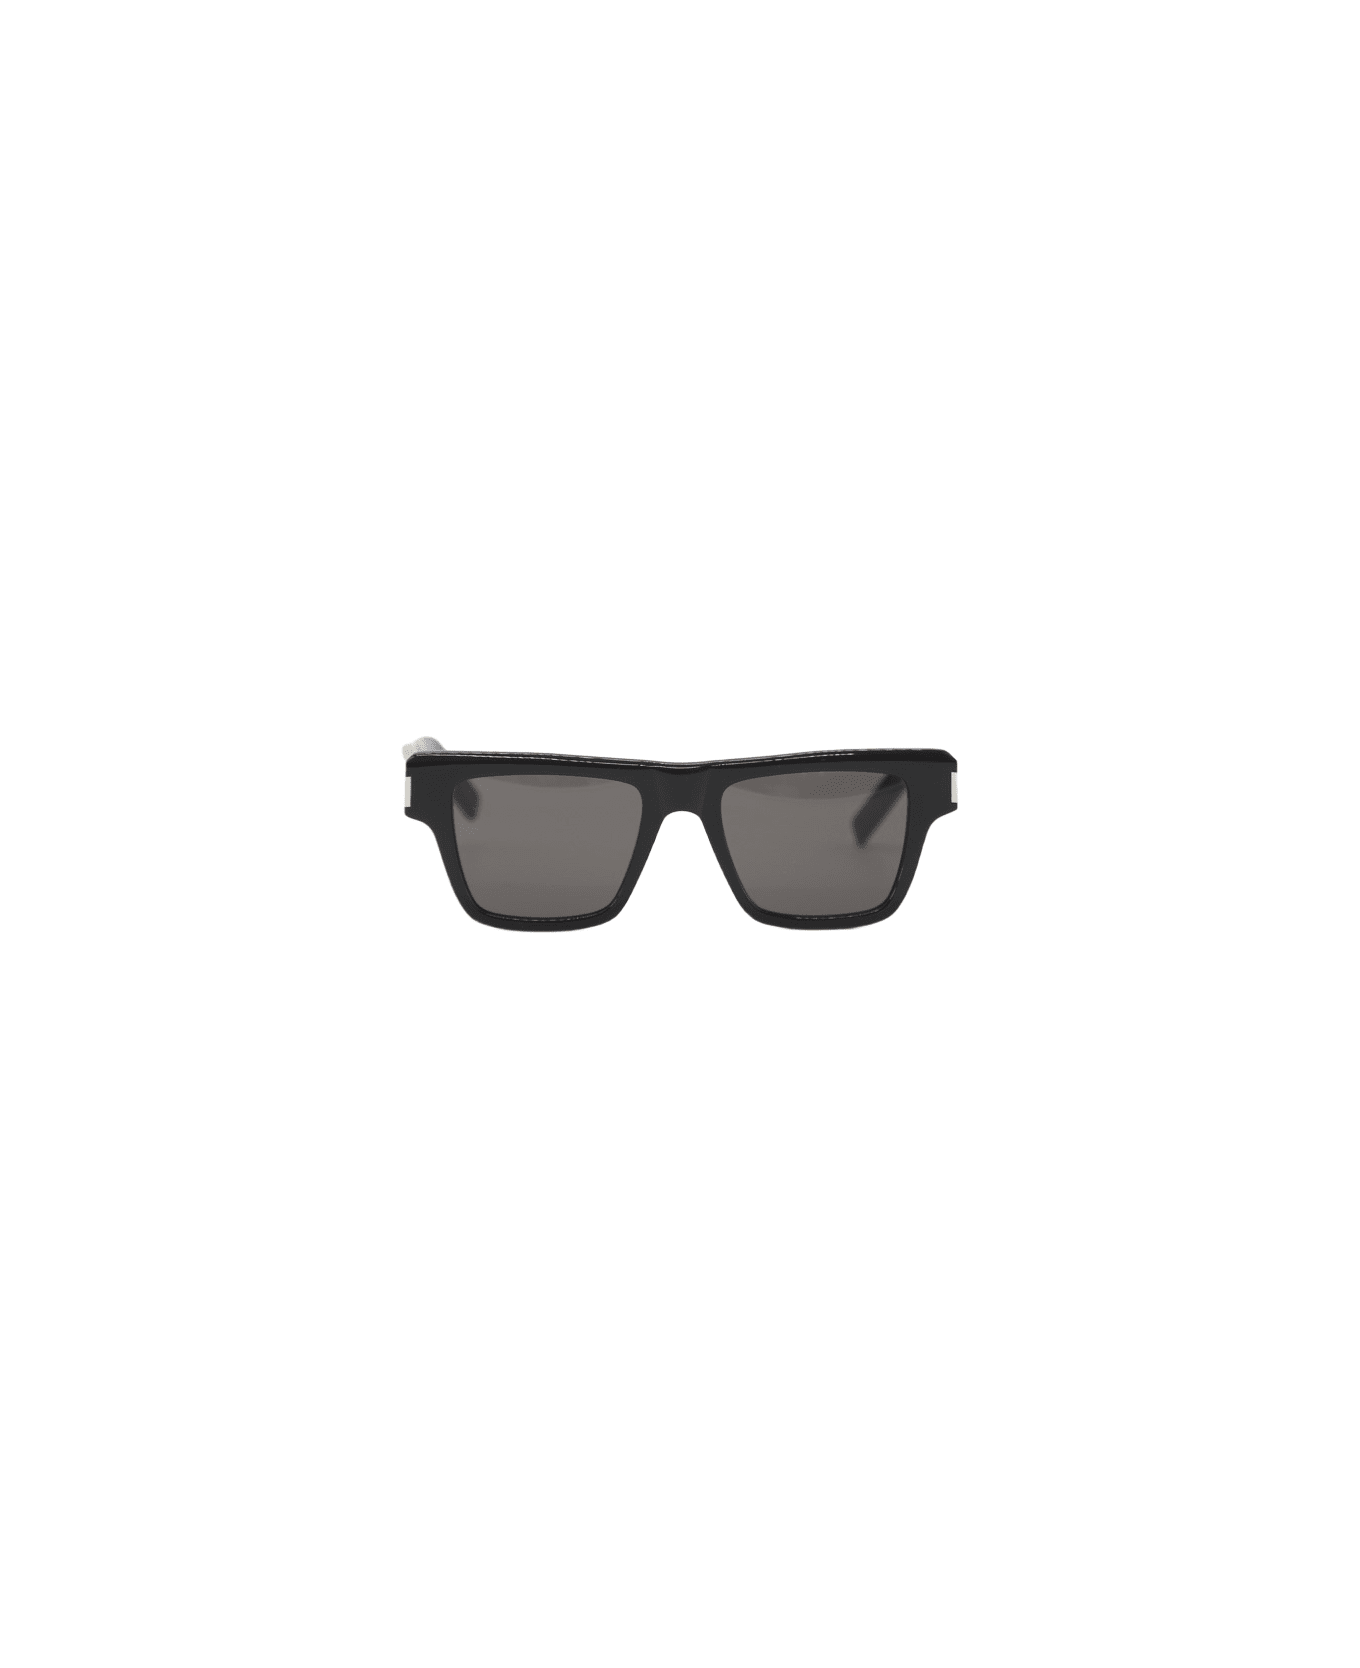 Saint Laurent Sl469 Sunglasses In Acetate With Engraved Logo On Temples - Black アイウェア